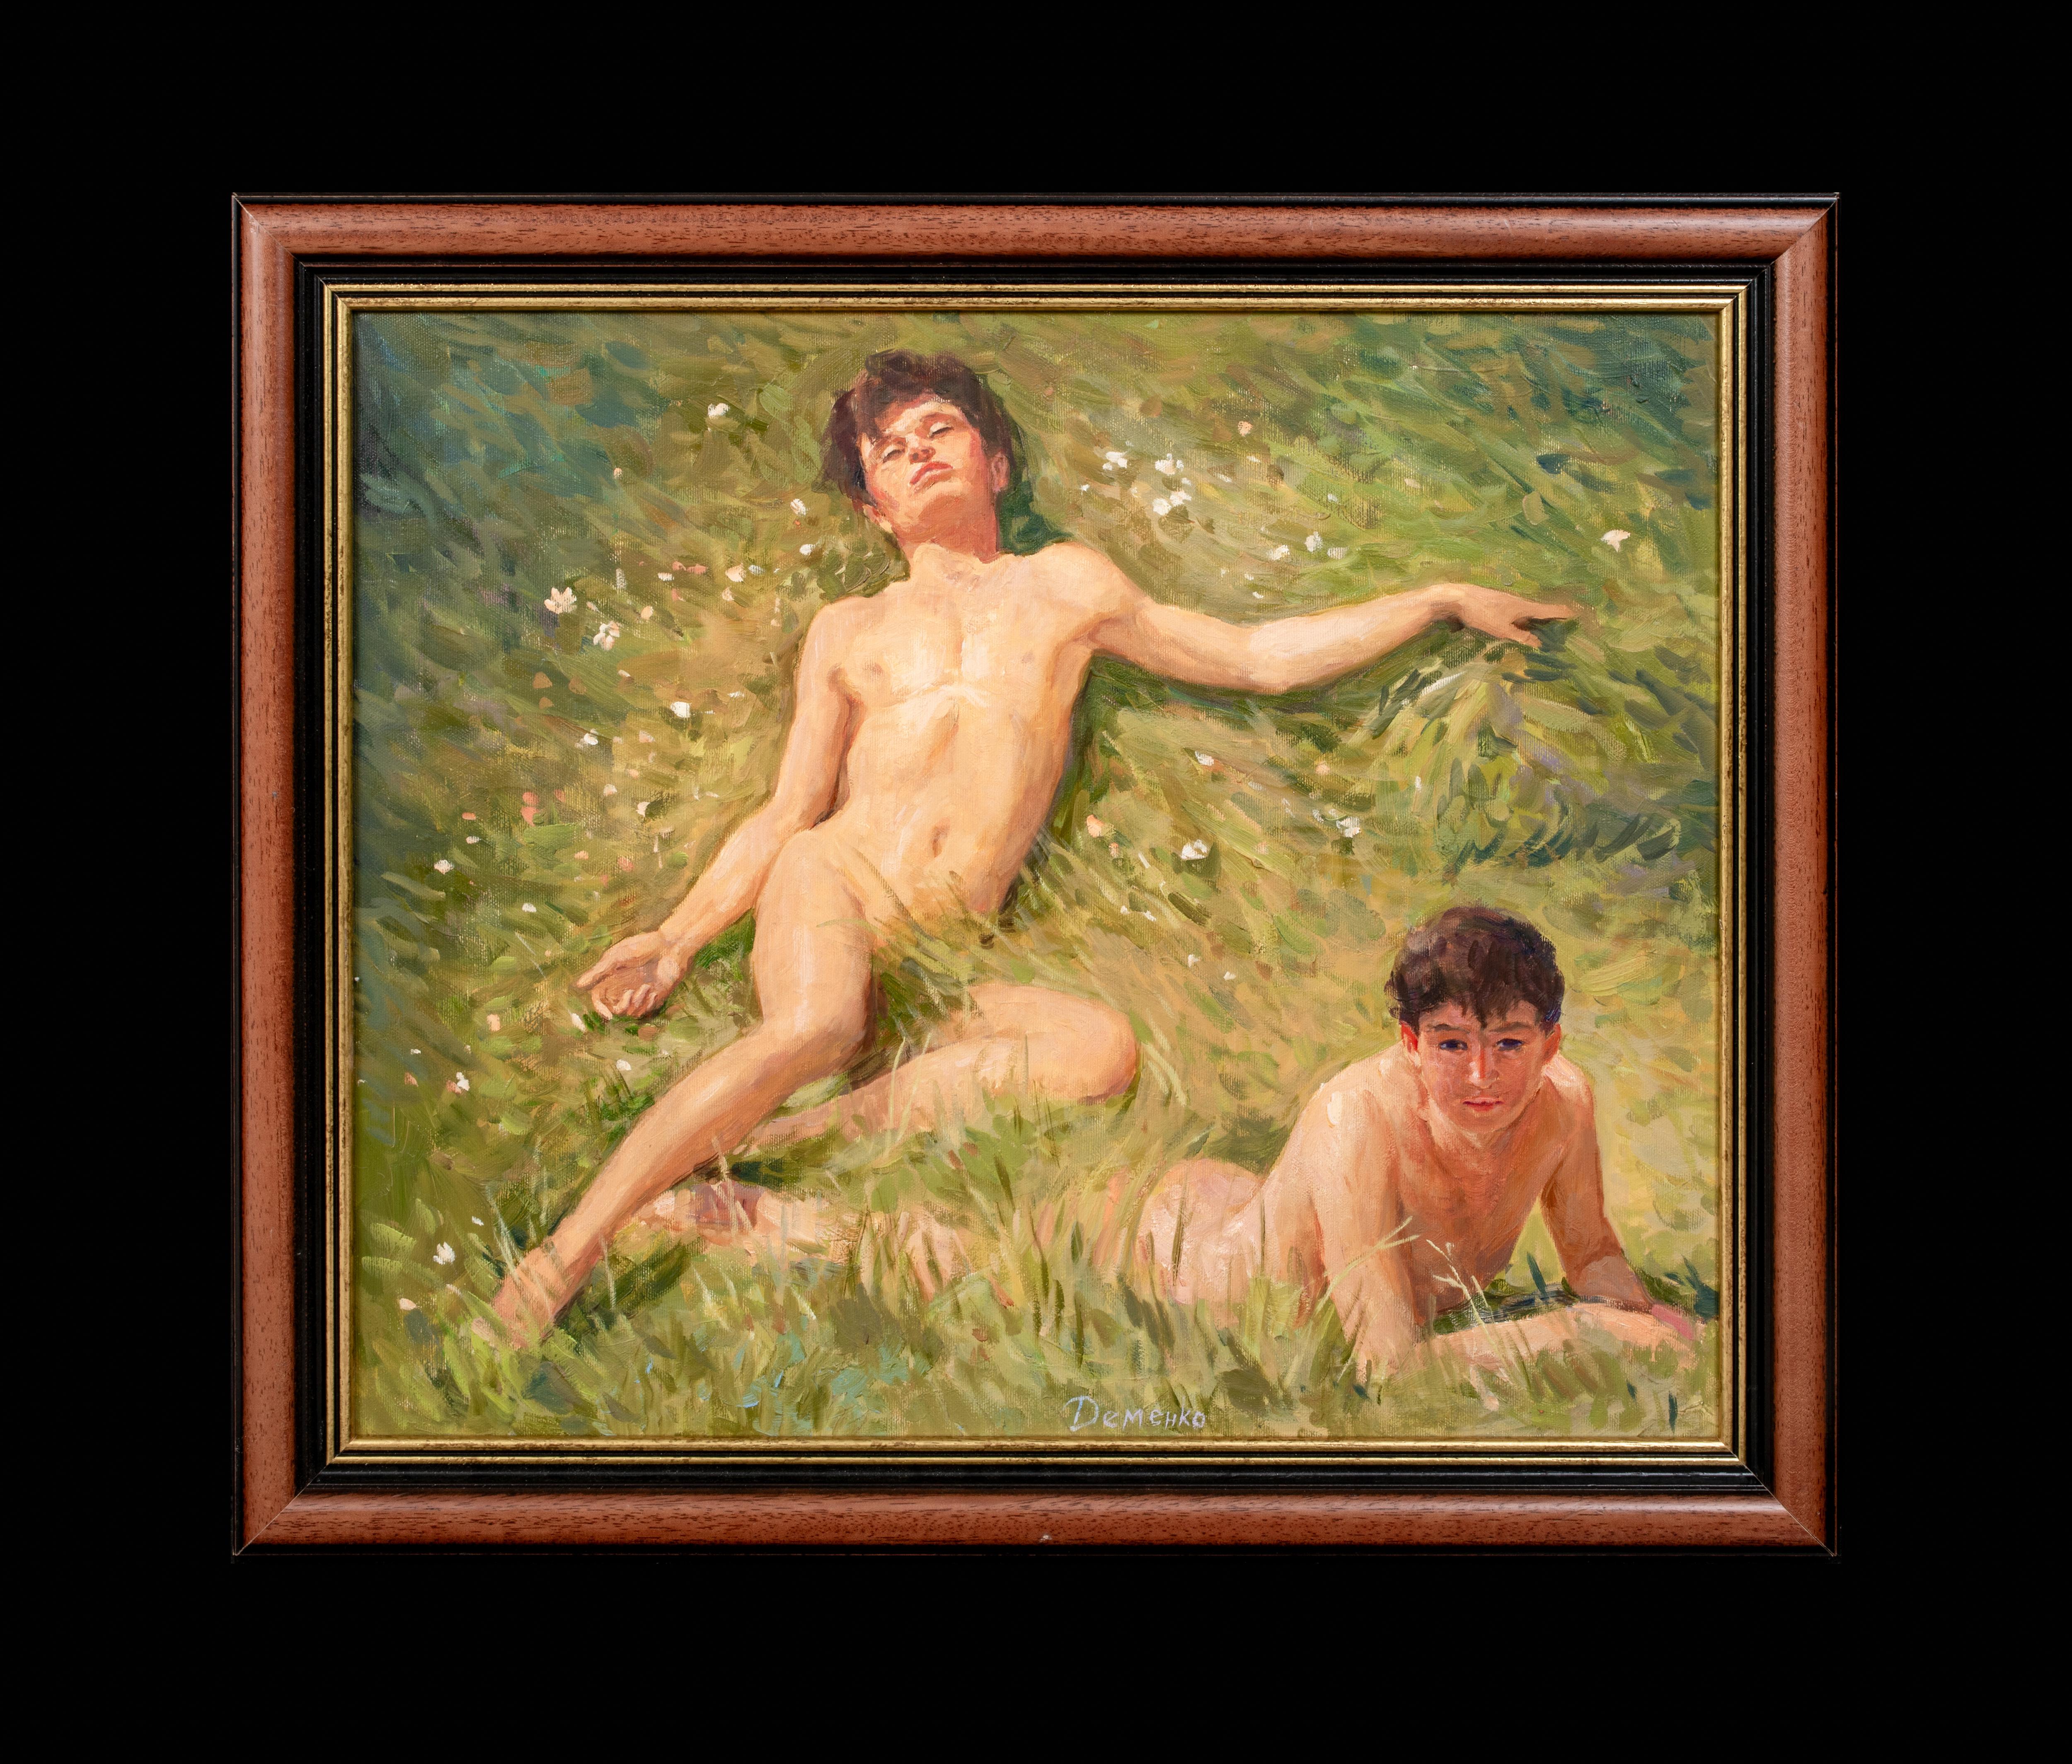 Nude Boys In The Summer Grass   - Painting by Unknown